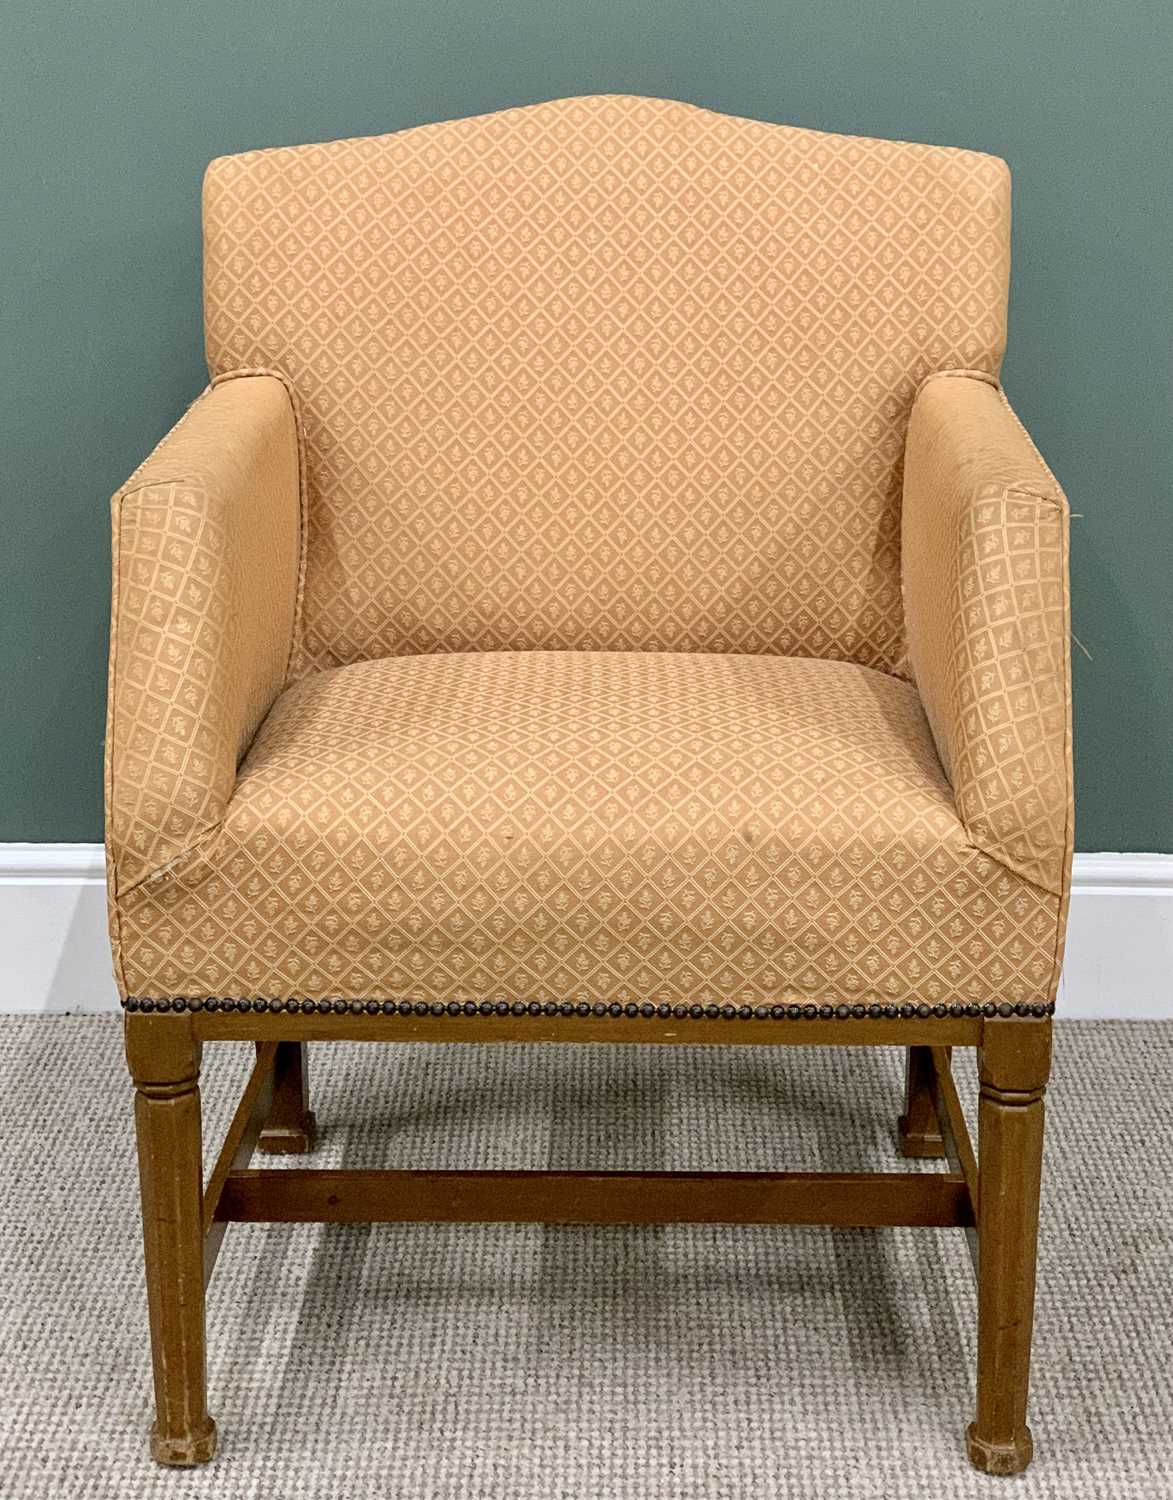 VINTAGE UPHOLSTERED EASY CHAIR - in diamond pattern fabric with shaped back, 87cms H, 63cms W, 44cms